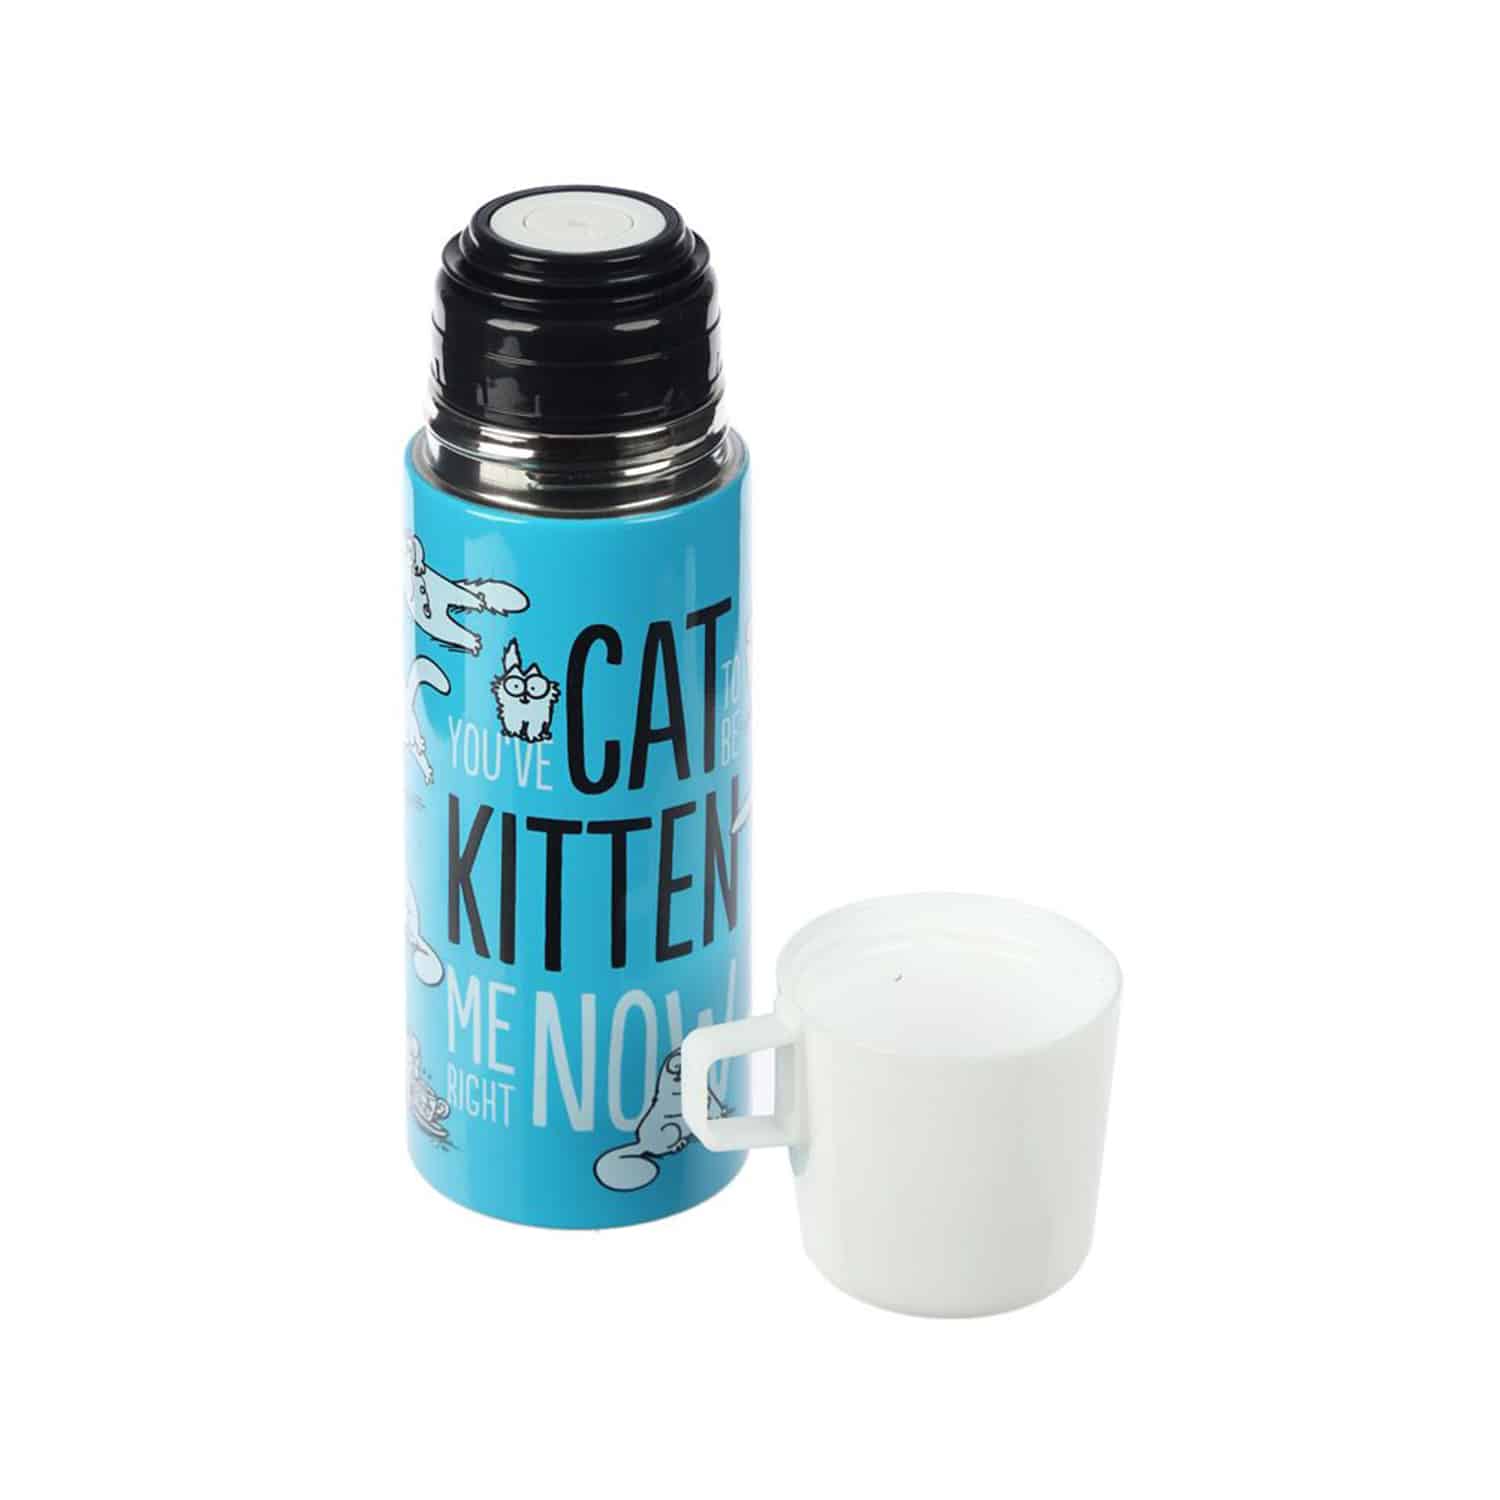 Simon's Cat Stainless Steel Bottle with Cup